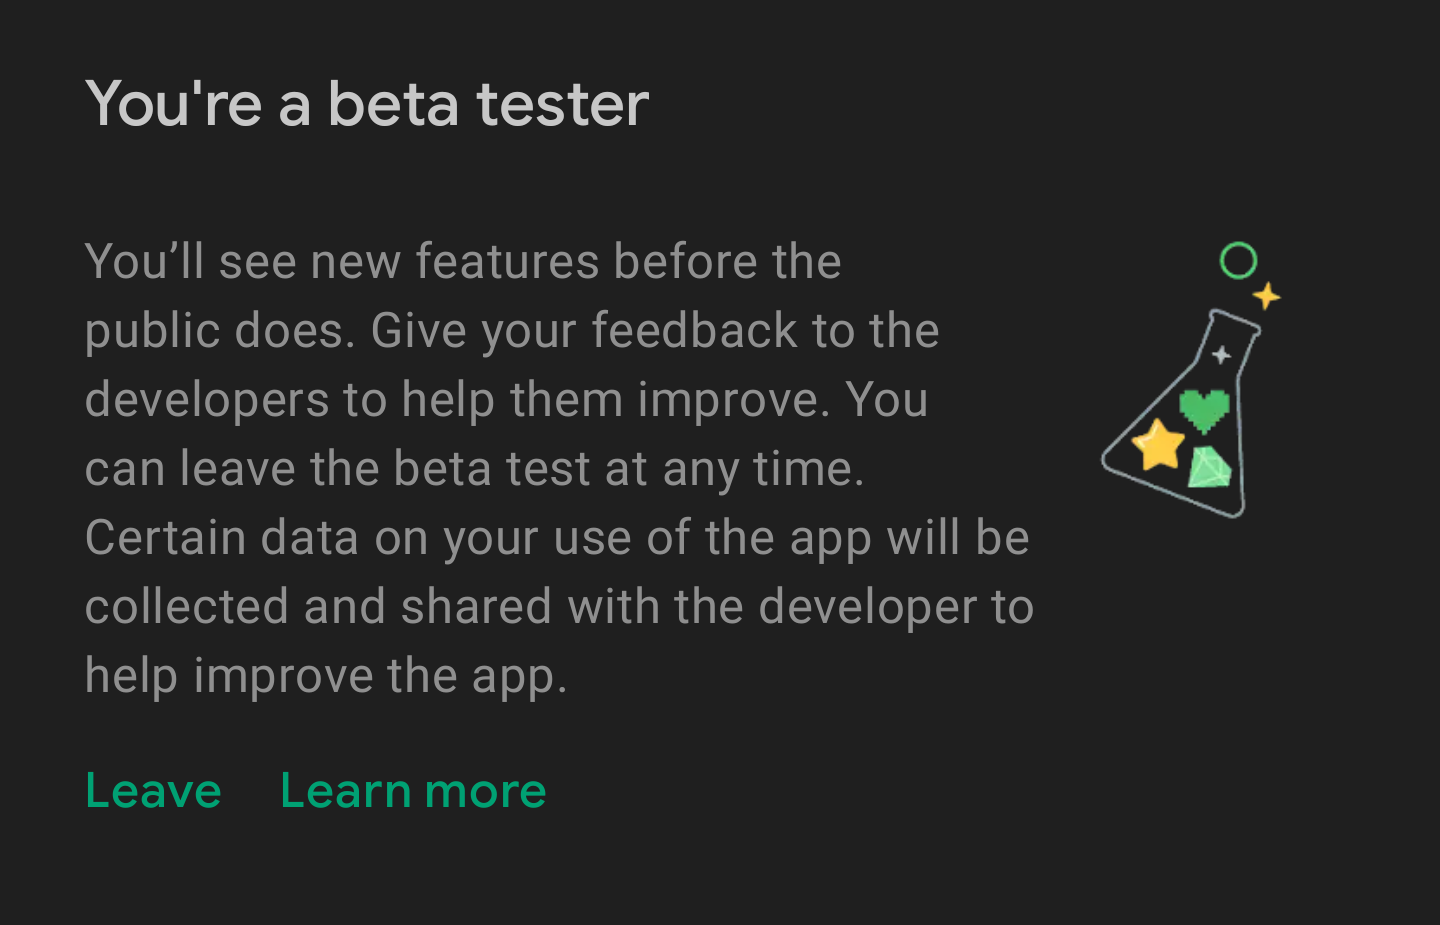 You are now a beta tester!